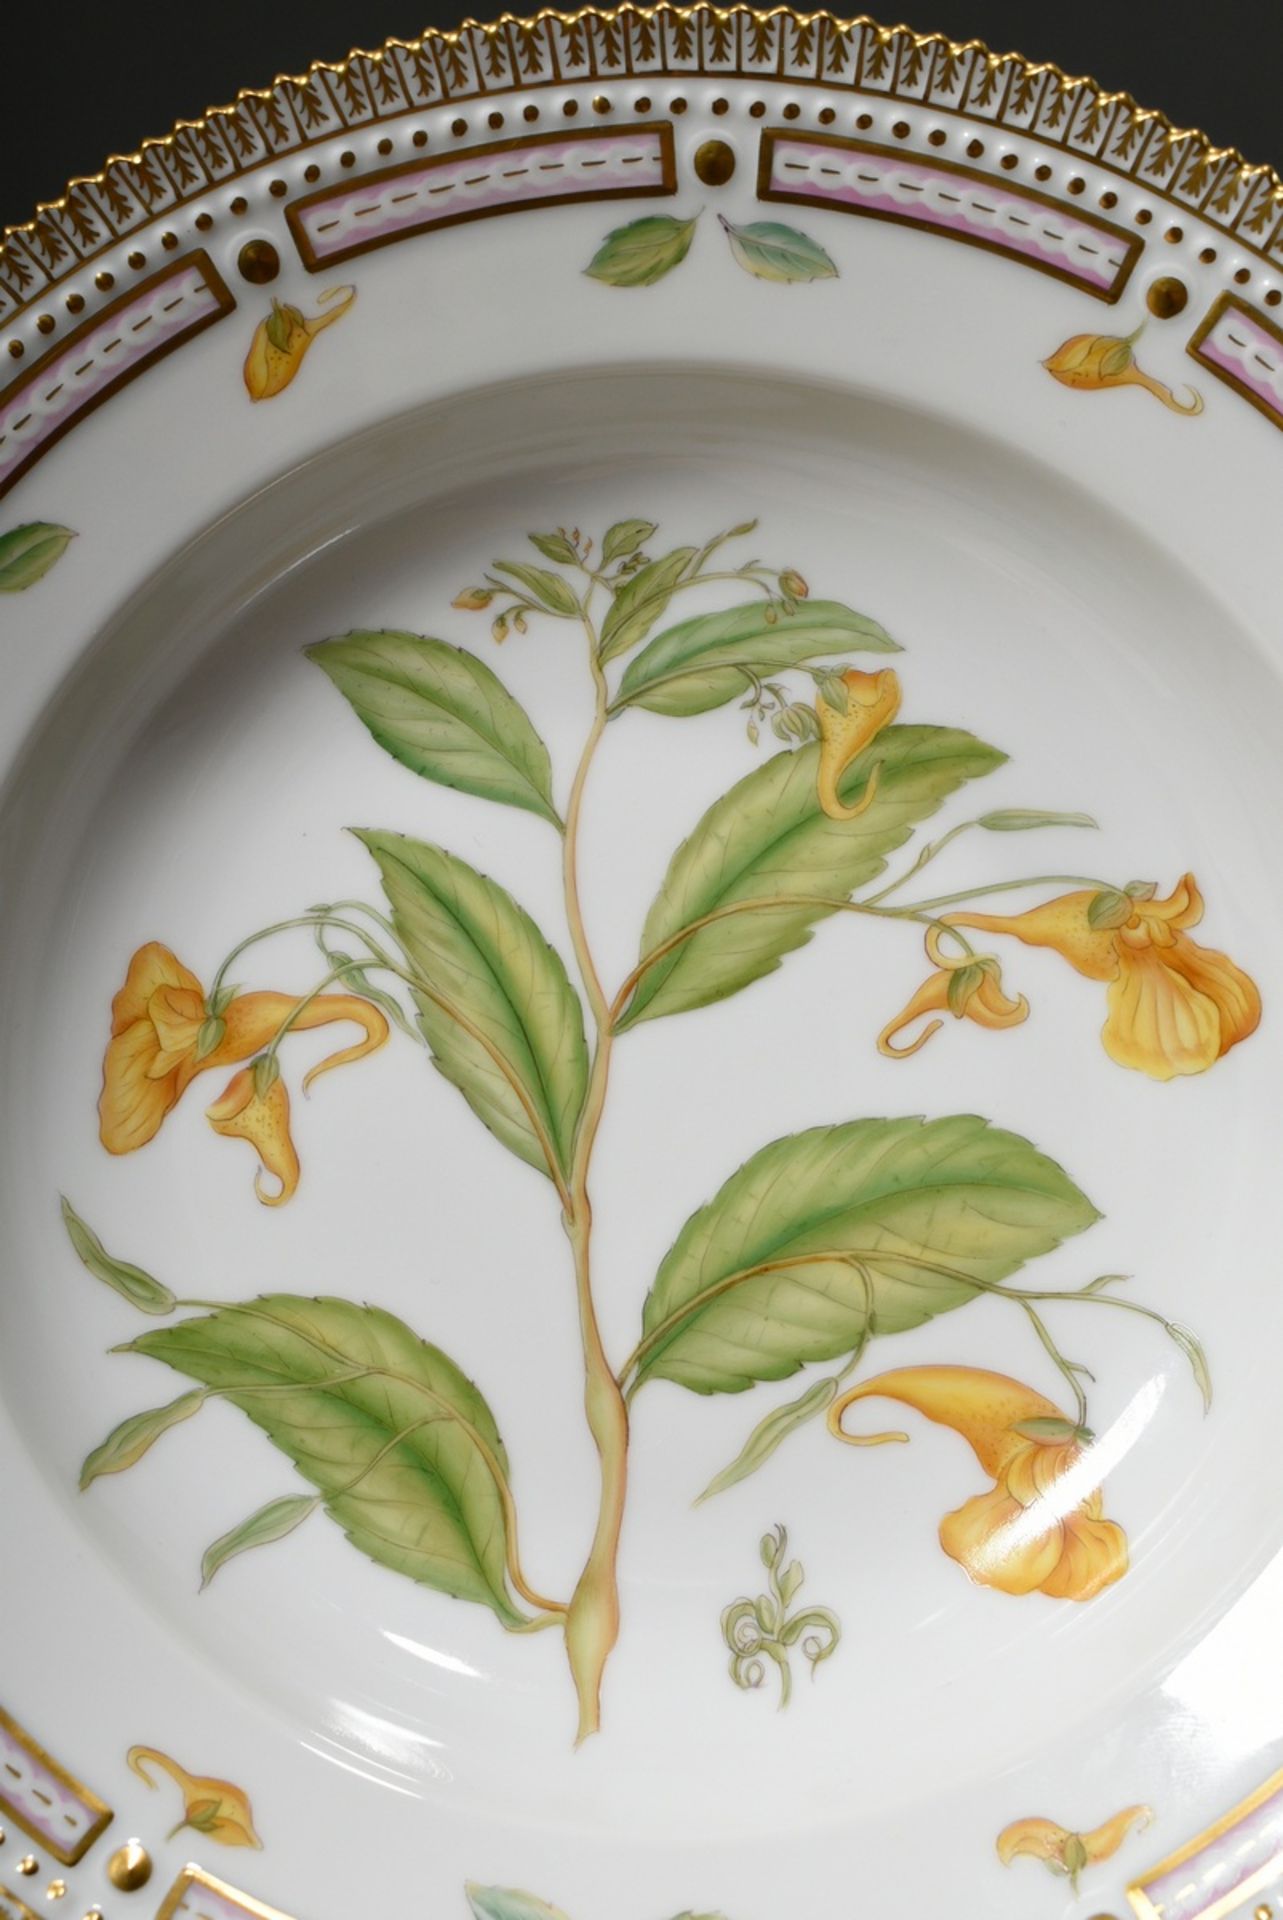 7 Royal Copenhagen "Flora Danica" plate with polychrome painting in the mirror and gold decorated s - Image 7 of 17